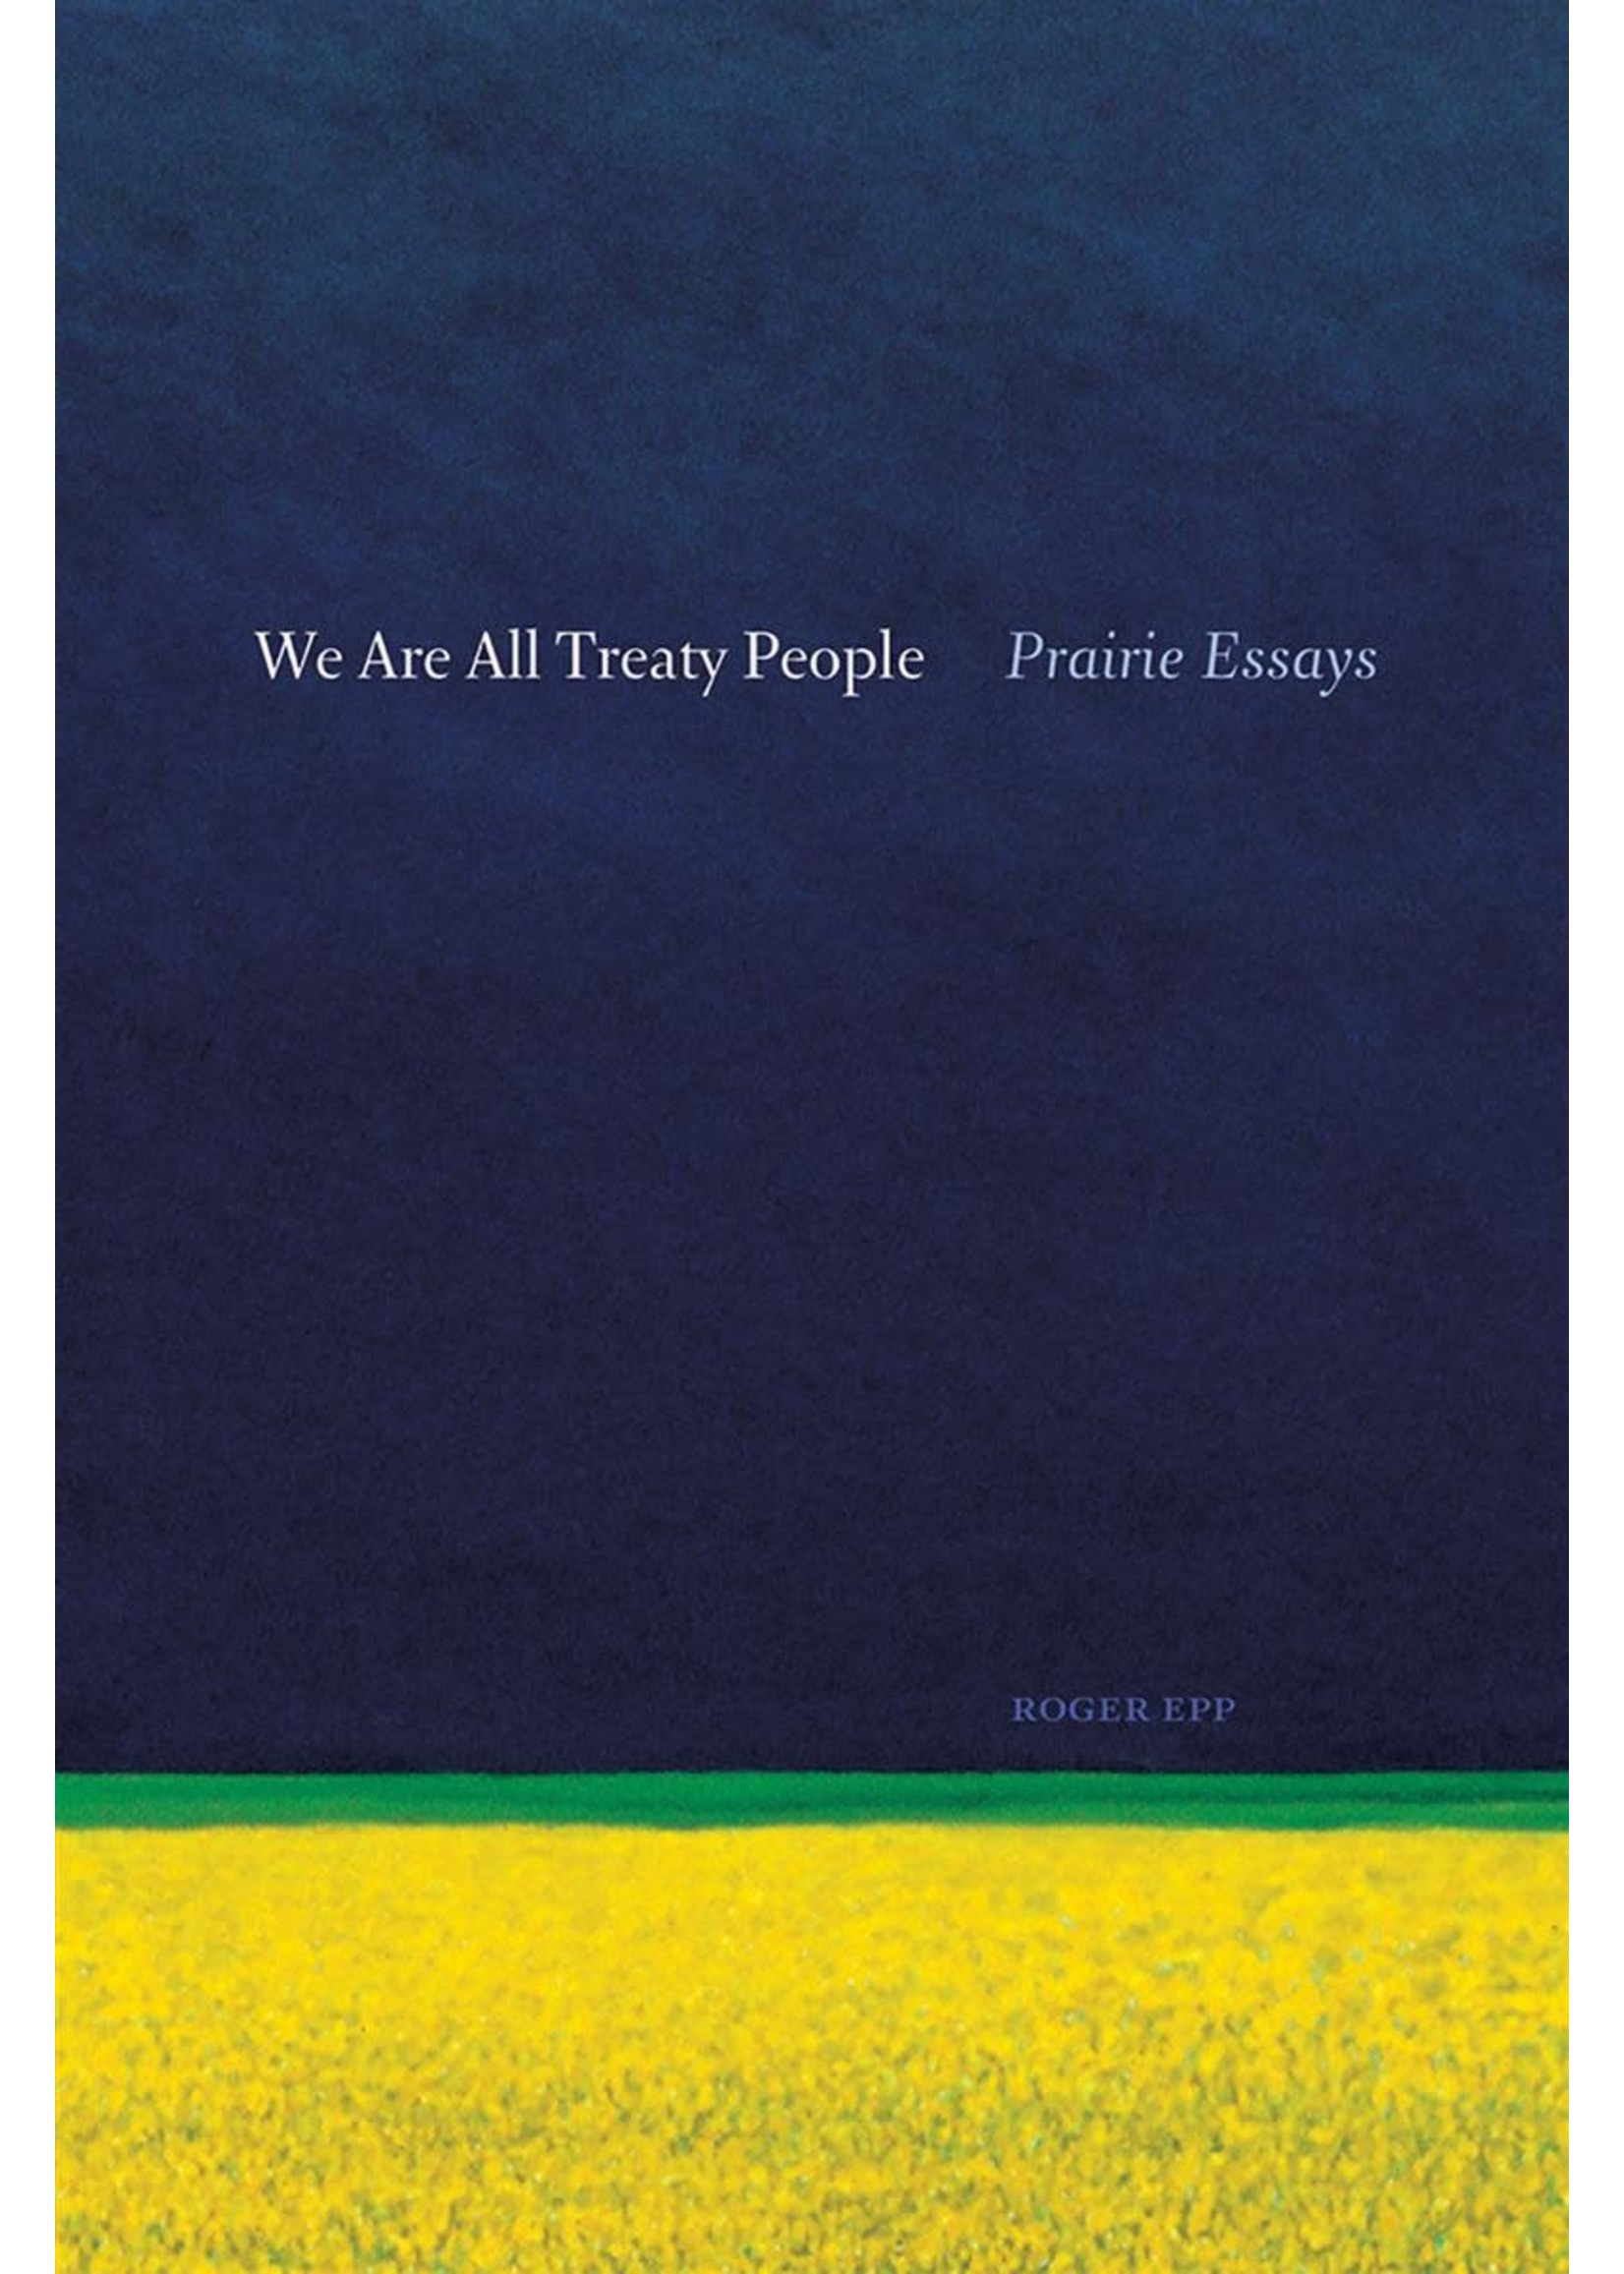 We Are All Treaty People: Prairie Essays by Roger Epp